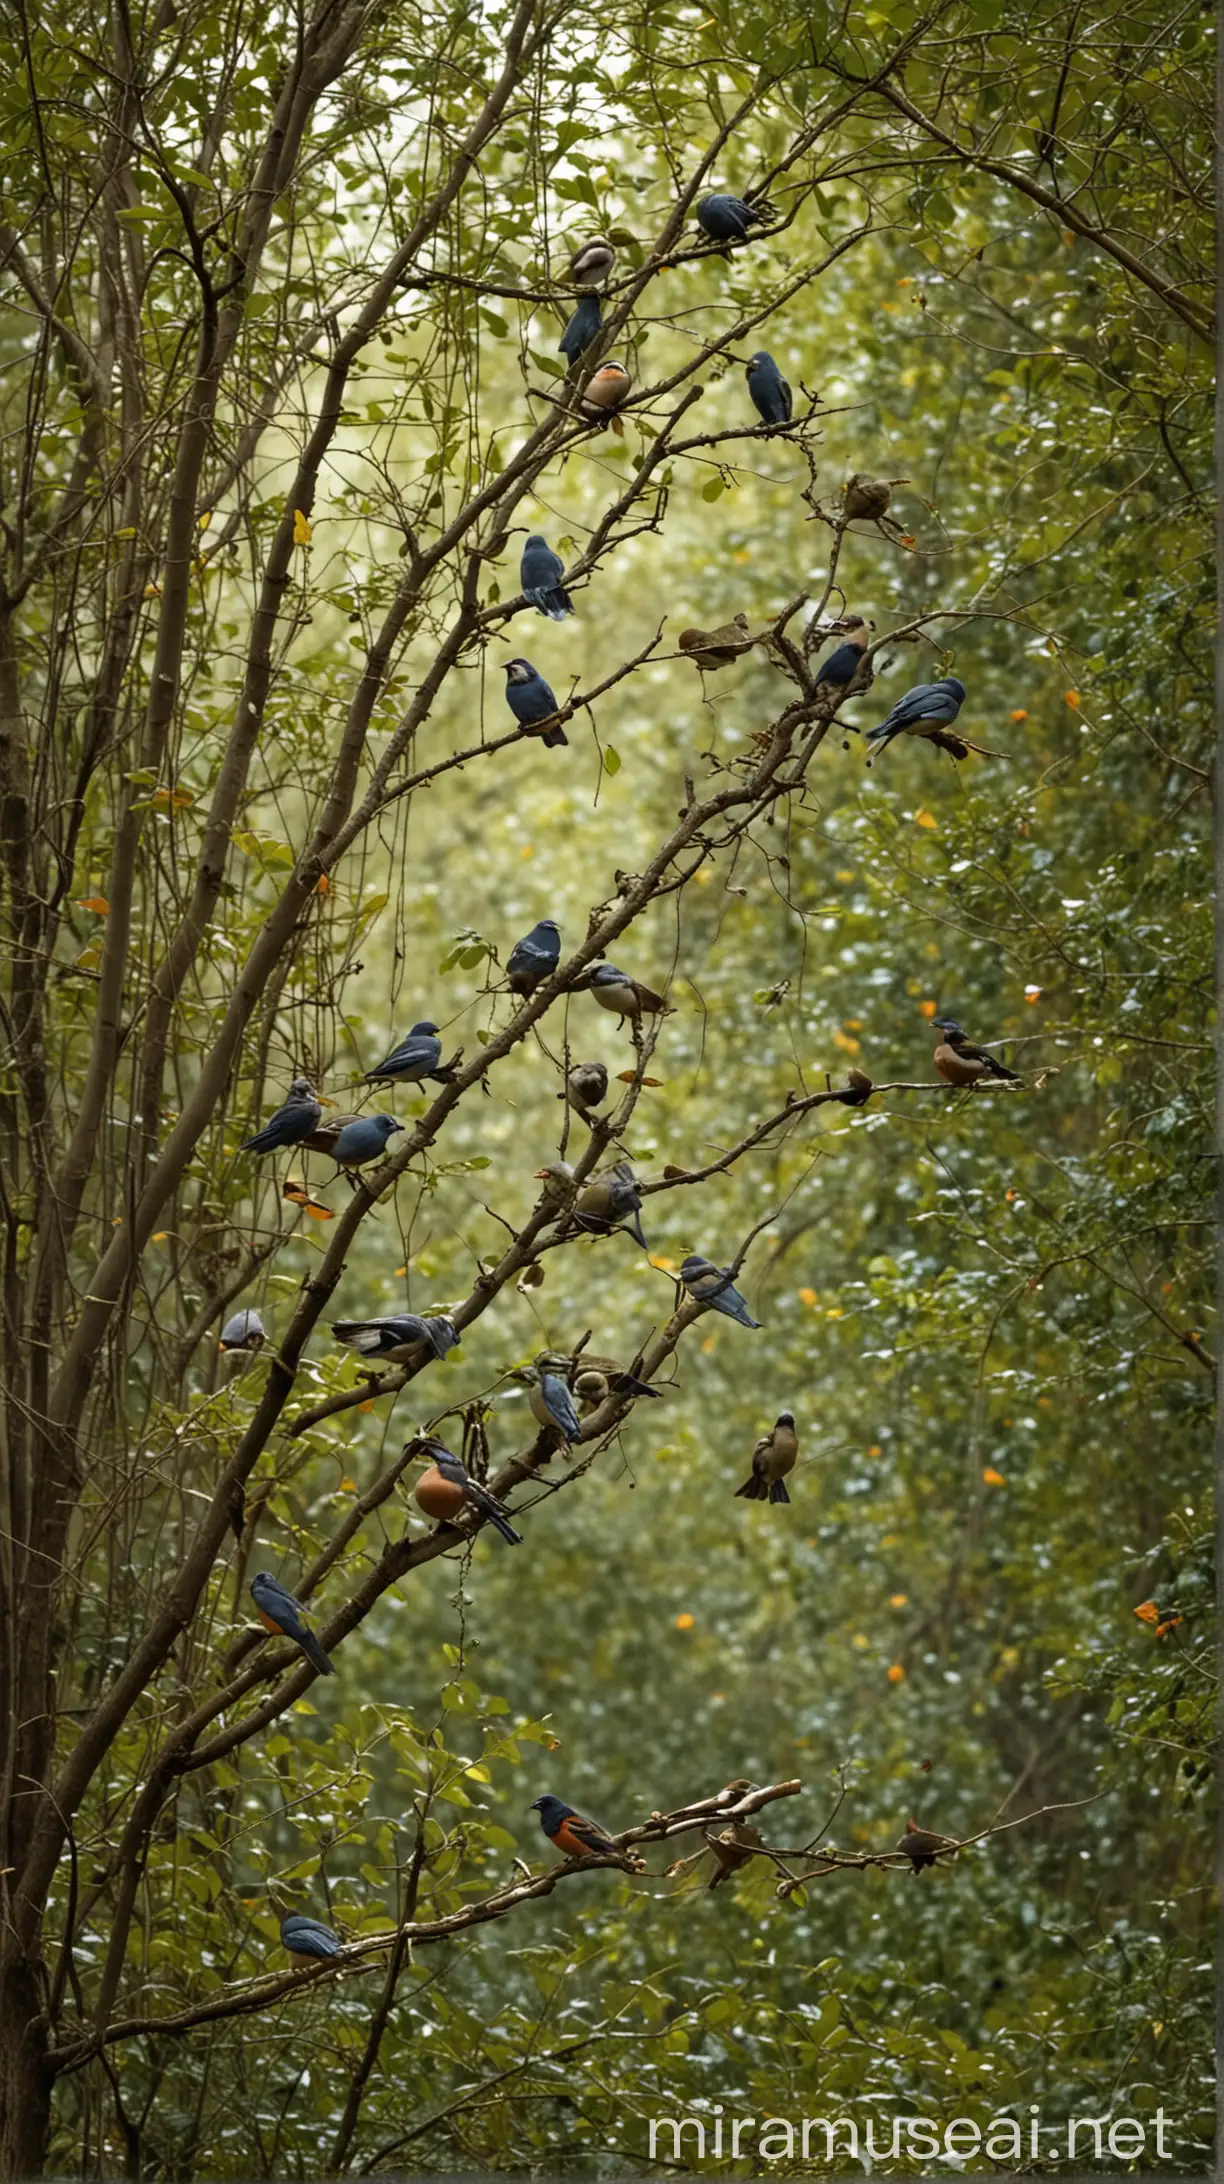 Birds' chirps were so harmonious that they attracted travelers. Their chirps were so harmonious that they attracted travelers. One day a stranger came and began to play the birds' trills. All the wonderful music of the grove was blown away by his ineffective oration